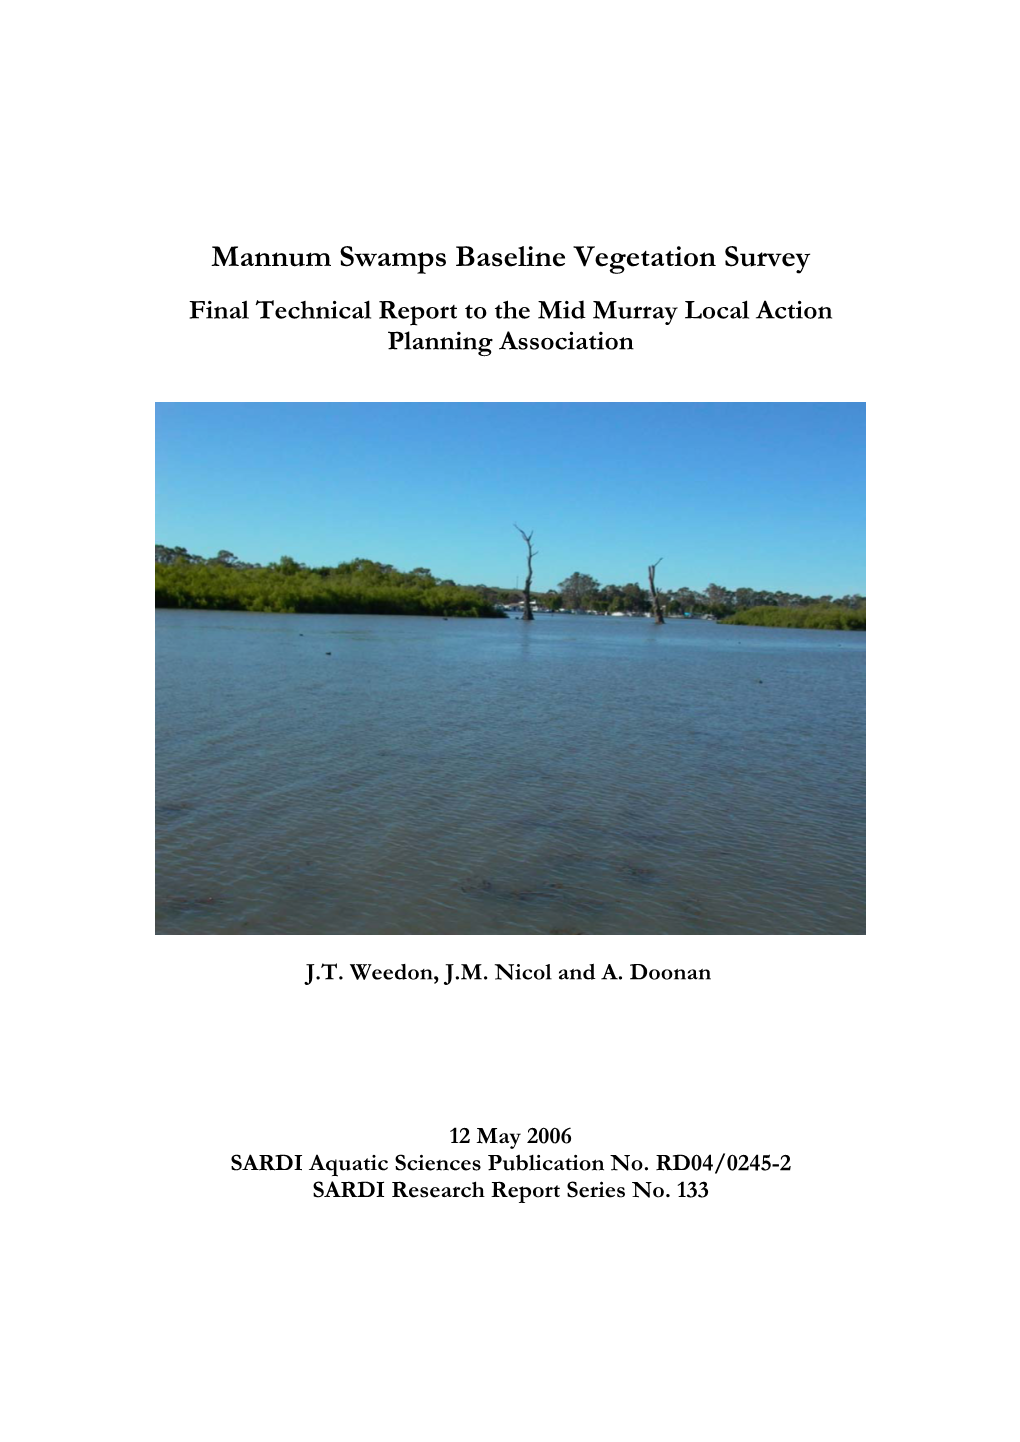 Mannum Swamps Baseline Vegetation Survey Final Technical Report to the Mid Murray Local Action Planning Association